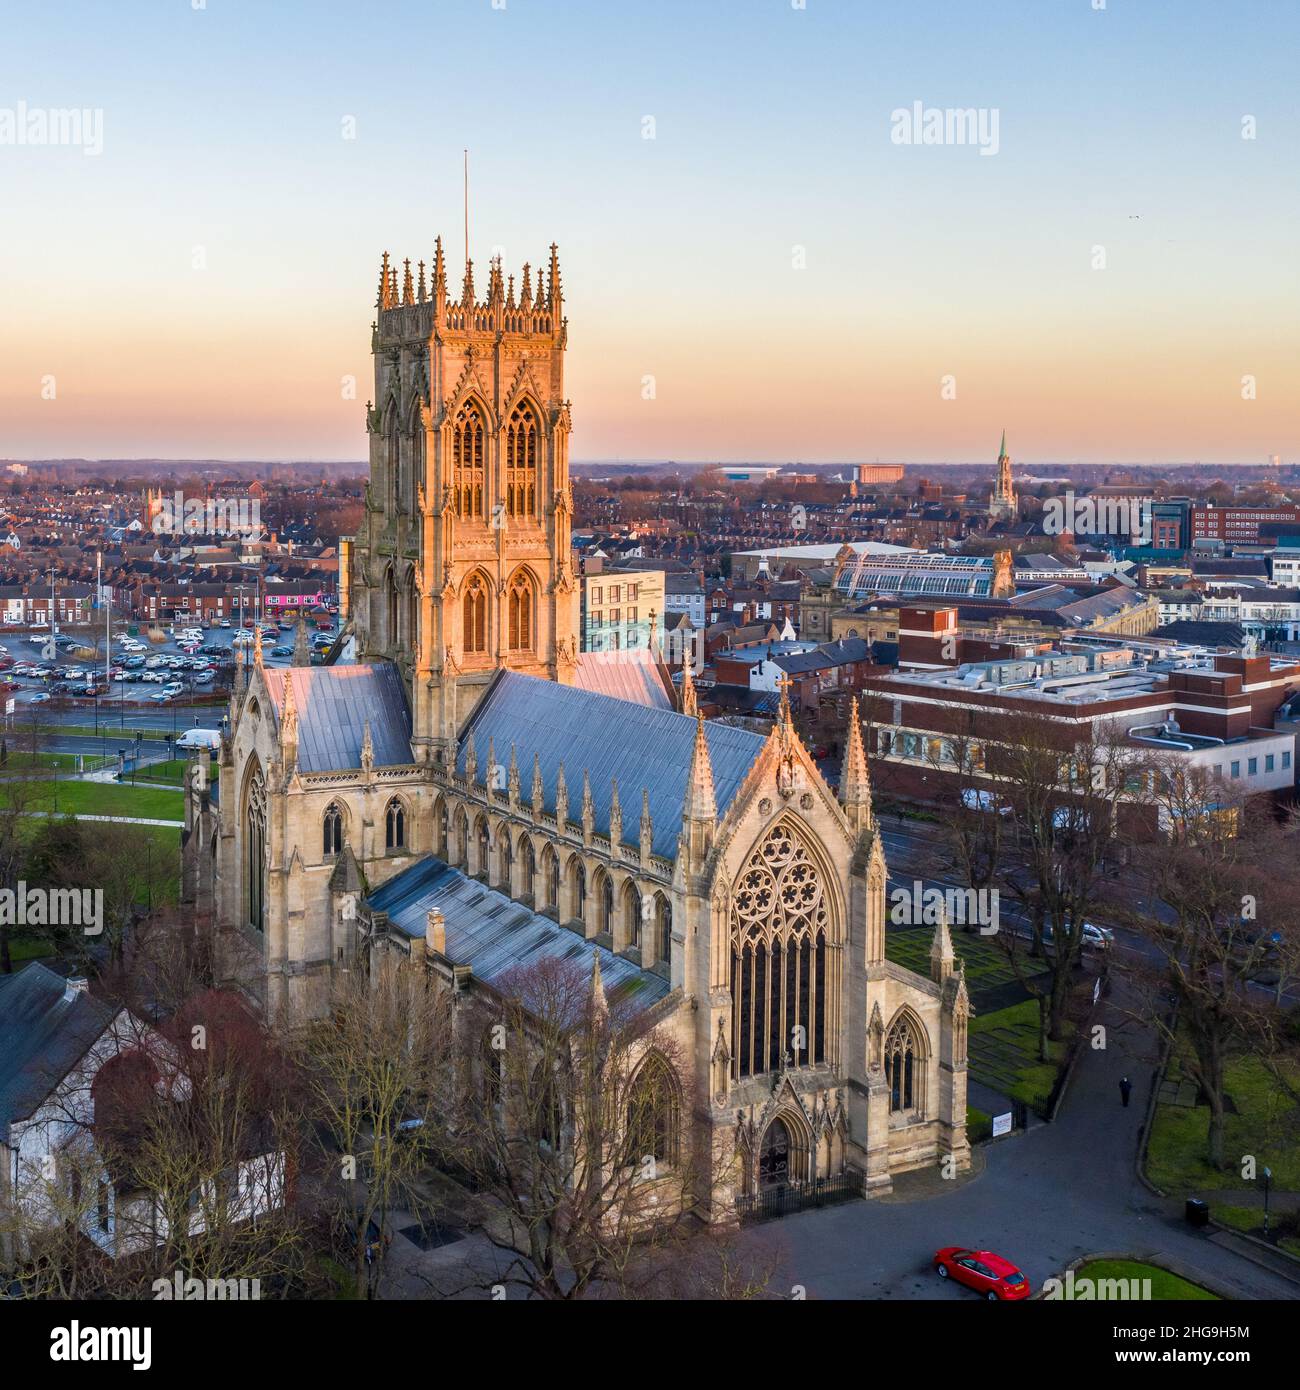 An aerial view of St George's church or Doncaster Minster at sunset Stock Photo